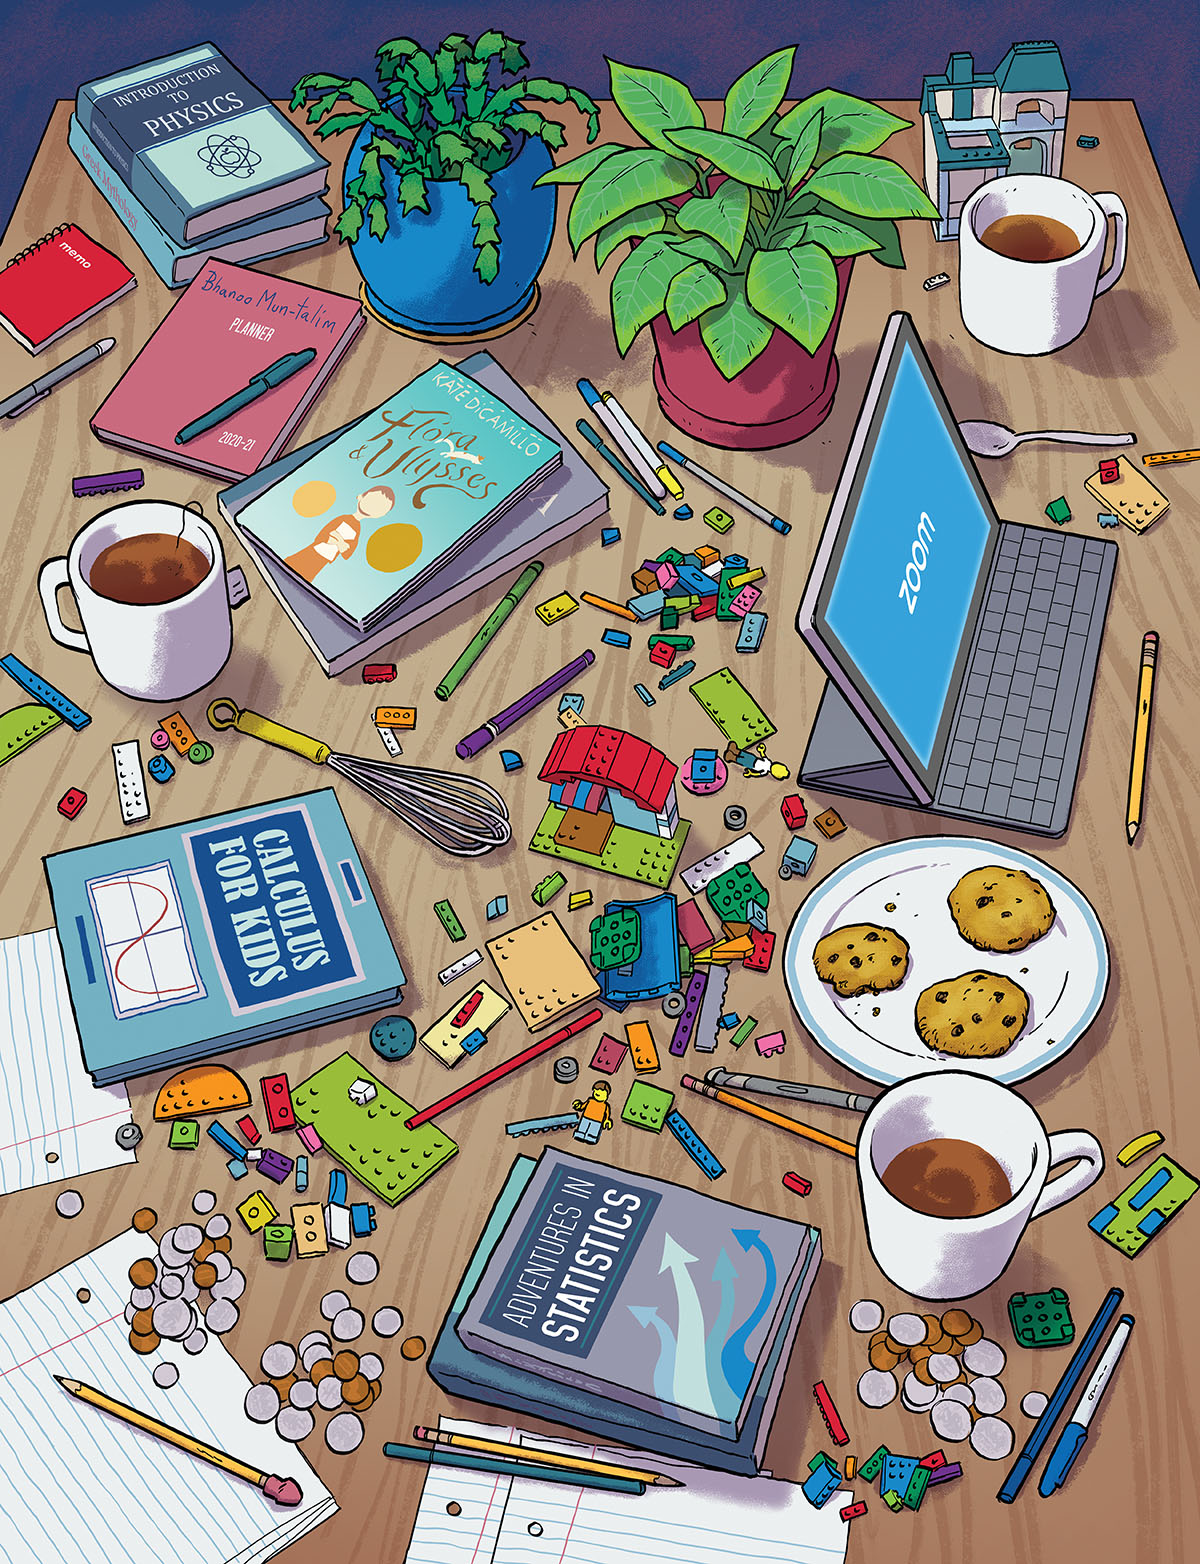 An illustration of a large wooden table covered with items for children and adults, including potted plants, a tablet with Zoom open, textbooks, Legos, cookies, money, paper, and more